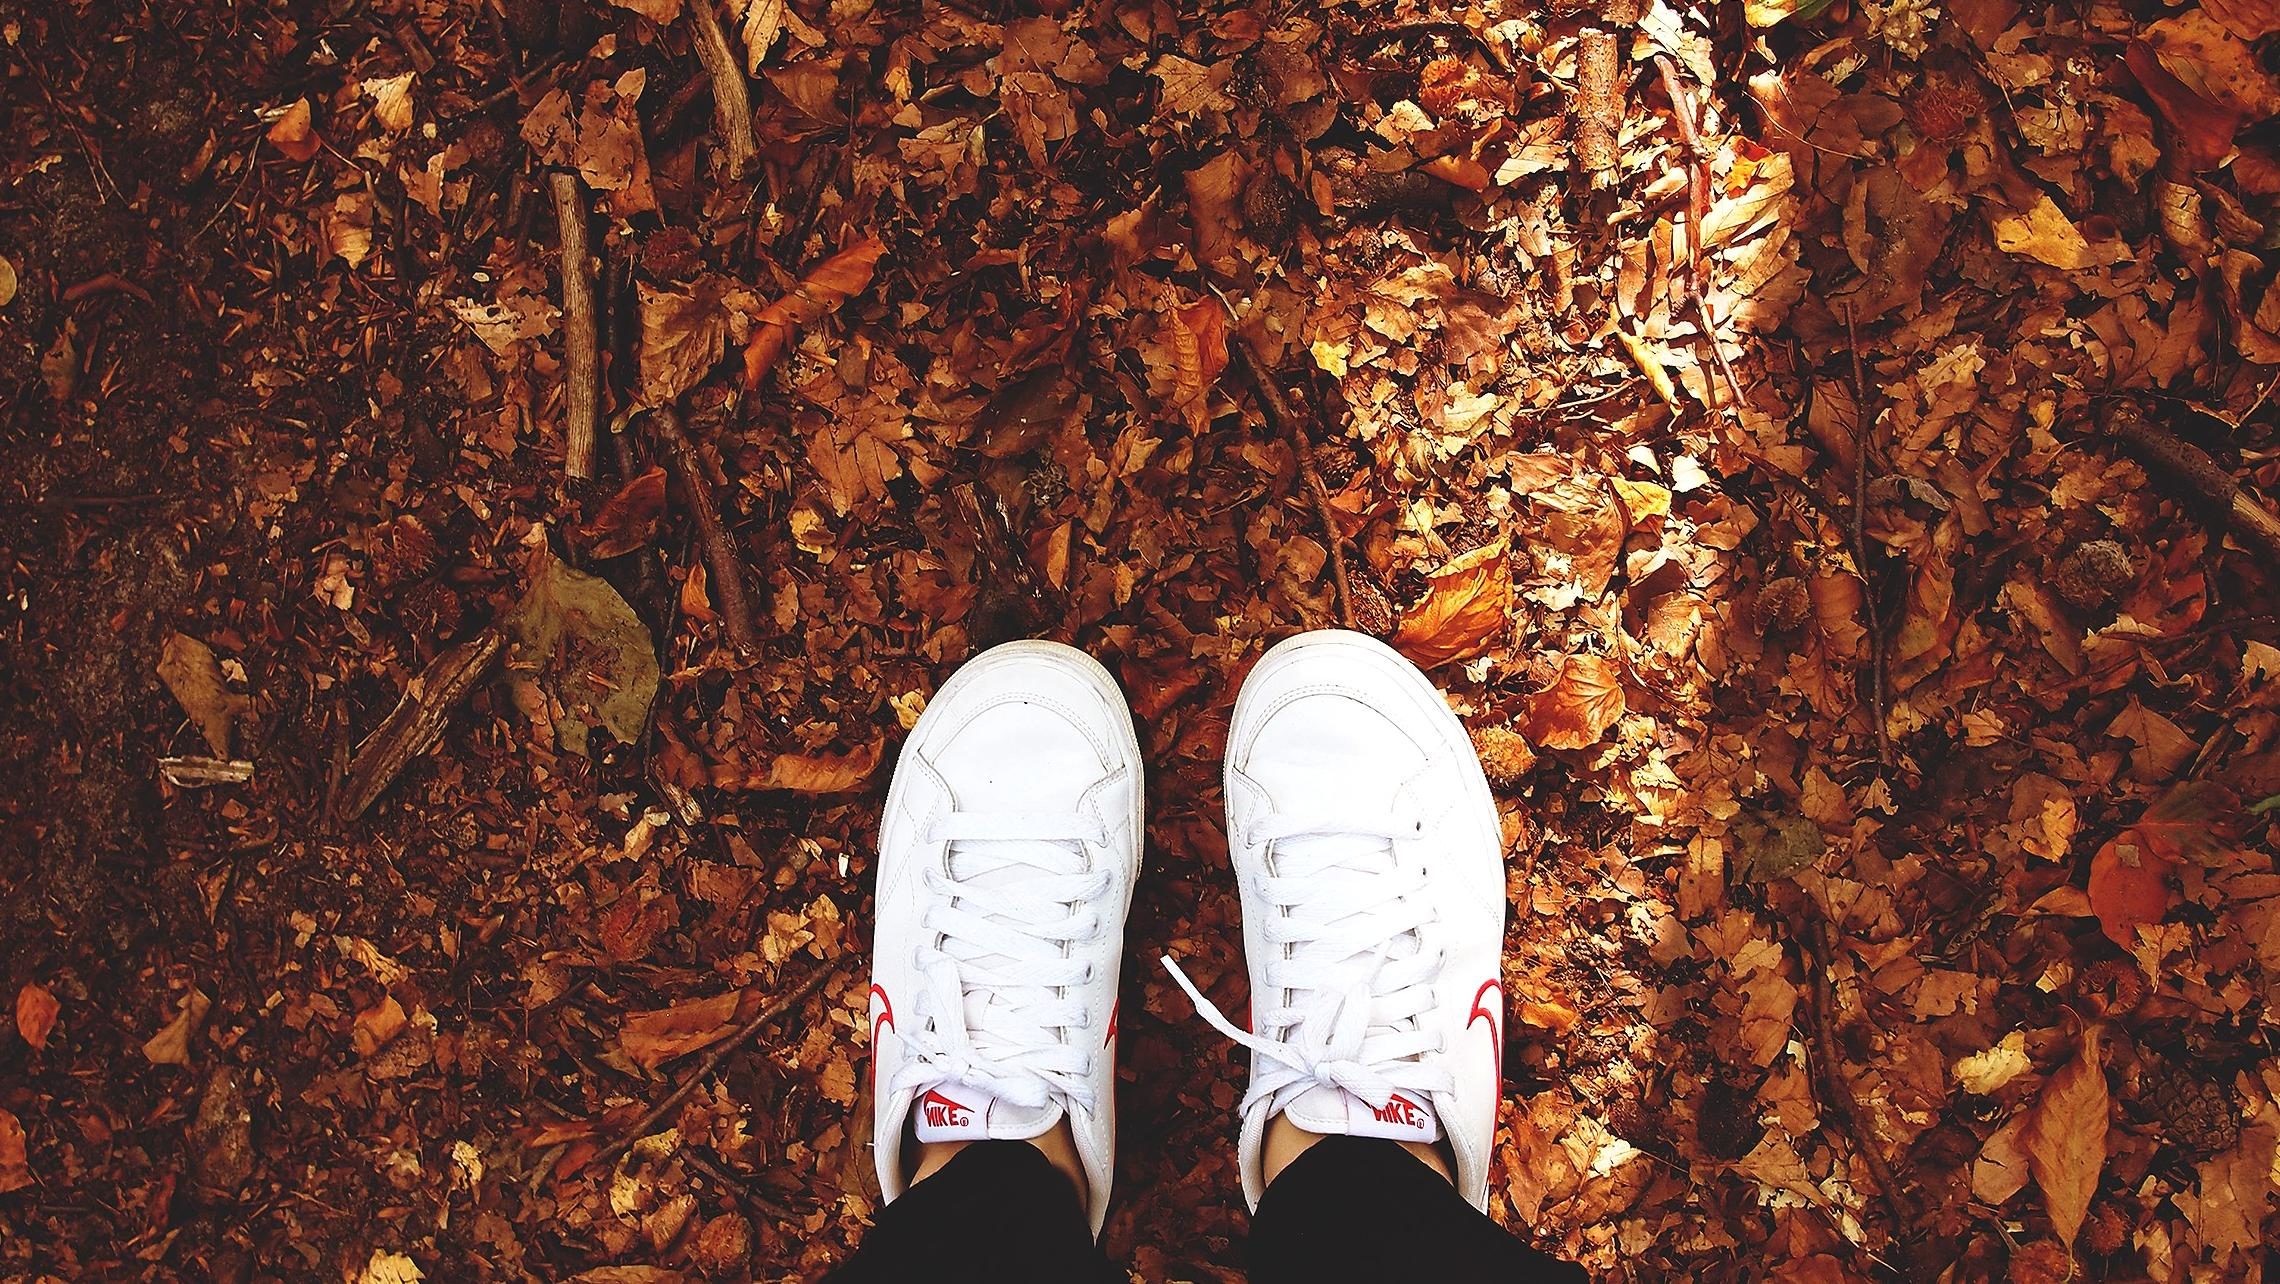 Free picture: sneakers, foot, footwear, autumn, ground, dry, leaves